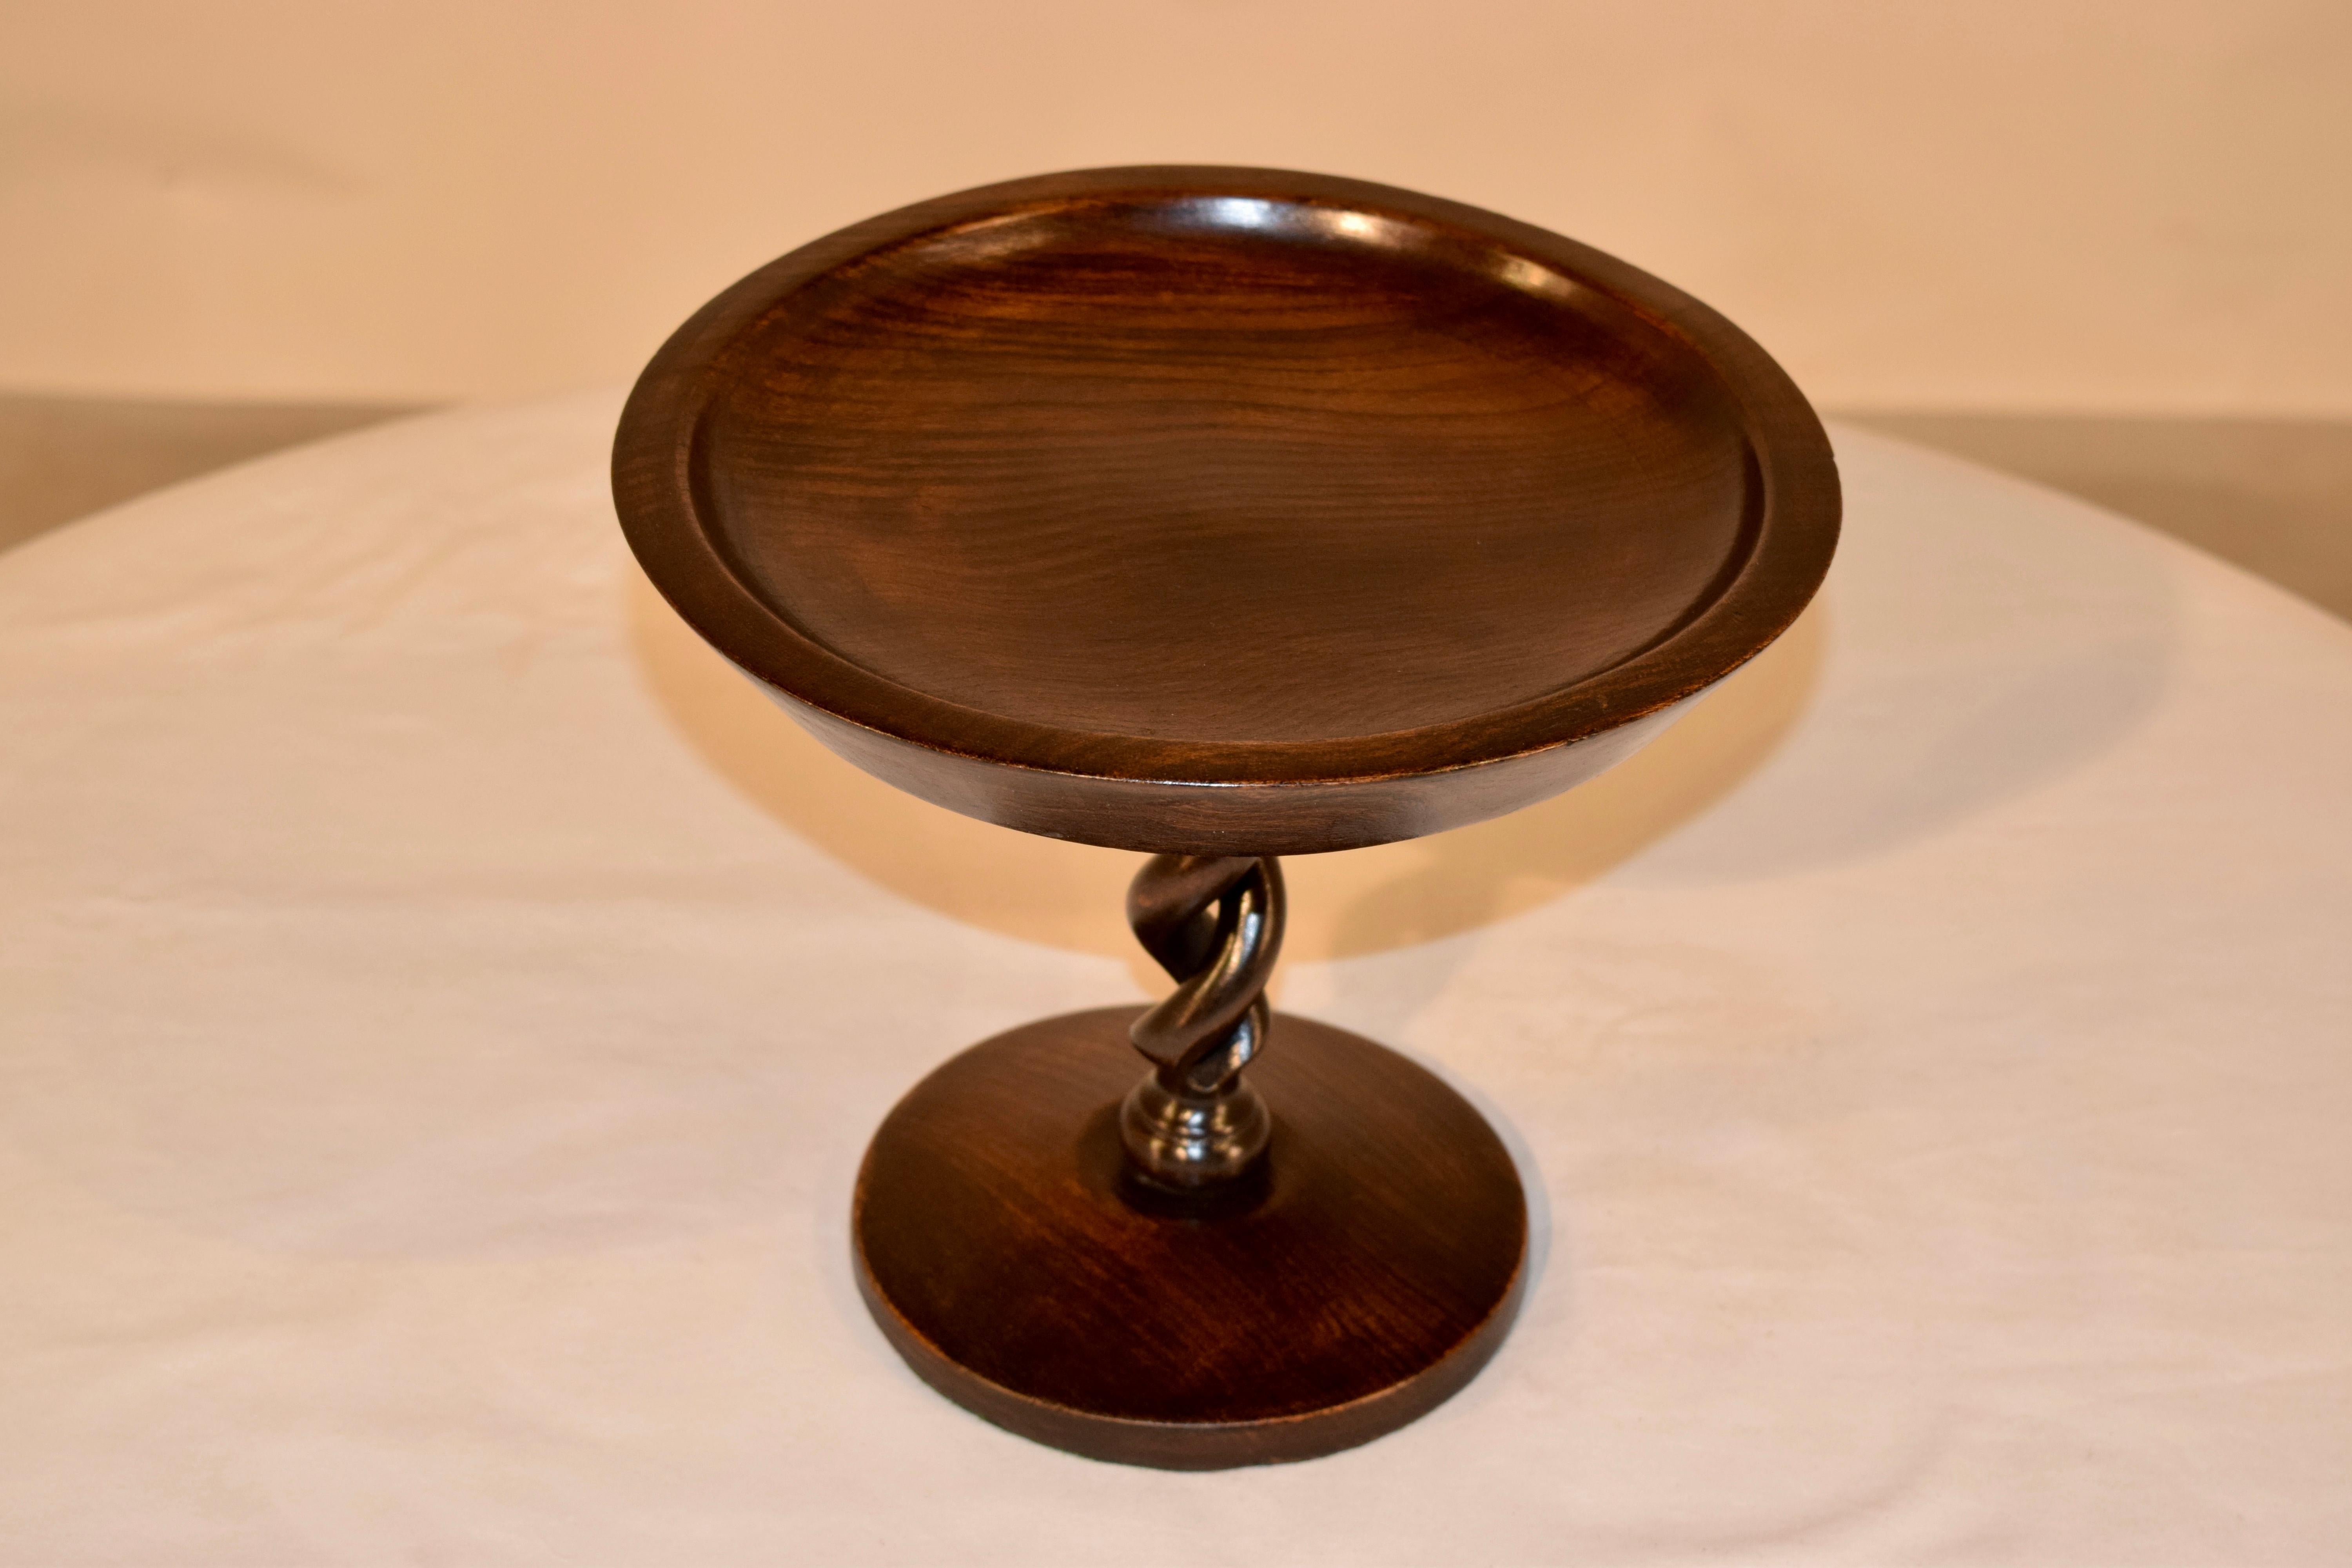 English oak hand-turned compote with a bowl shaped top supported on a hand-turned open barley twist column and turned base.